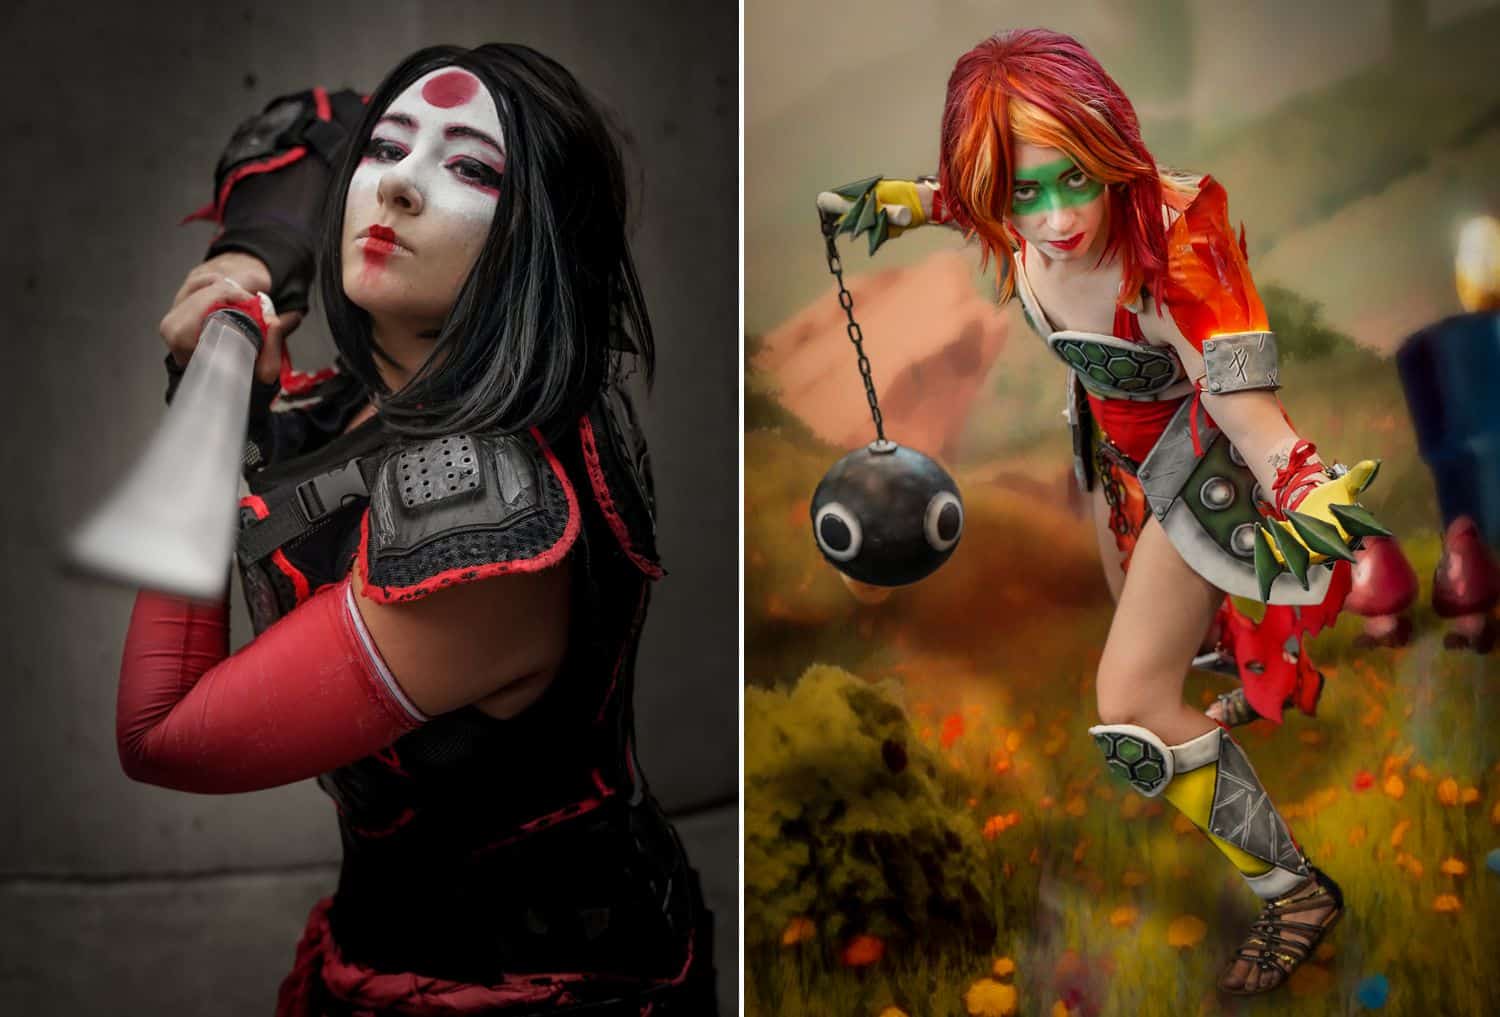 41 Fascinating Photos That Will Inspire More Powerful Portraits: Cosplay Photographer Joe Alfano